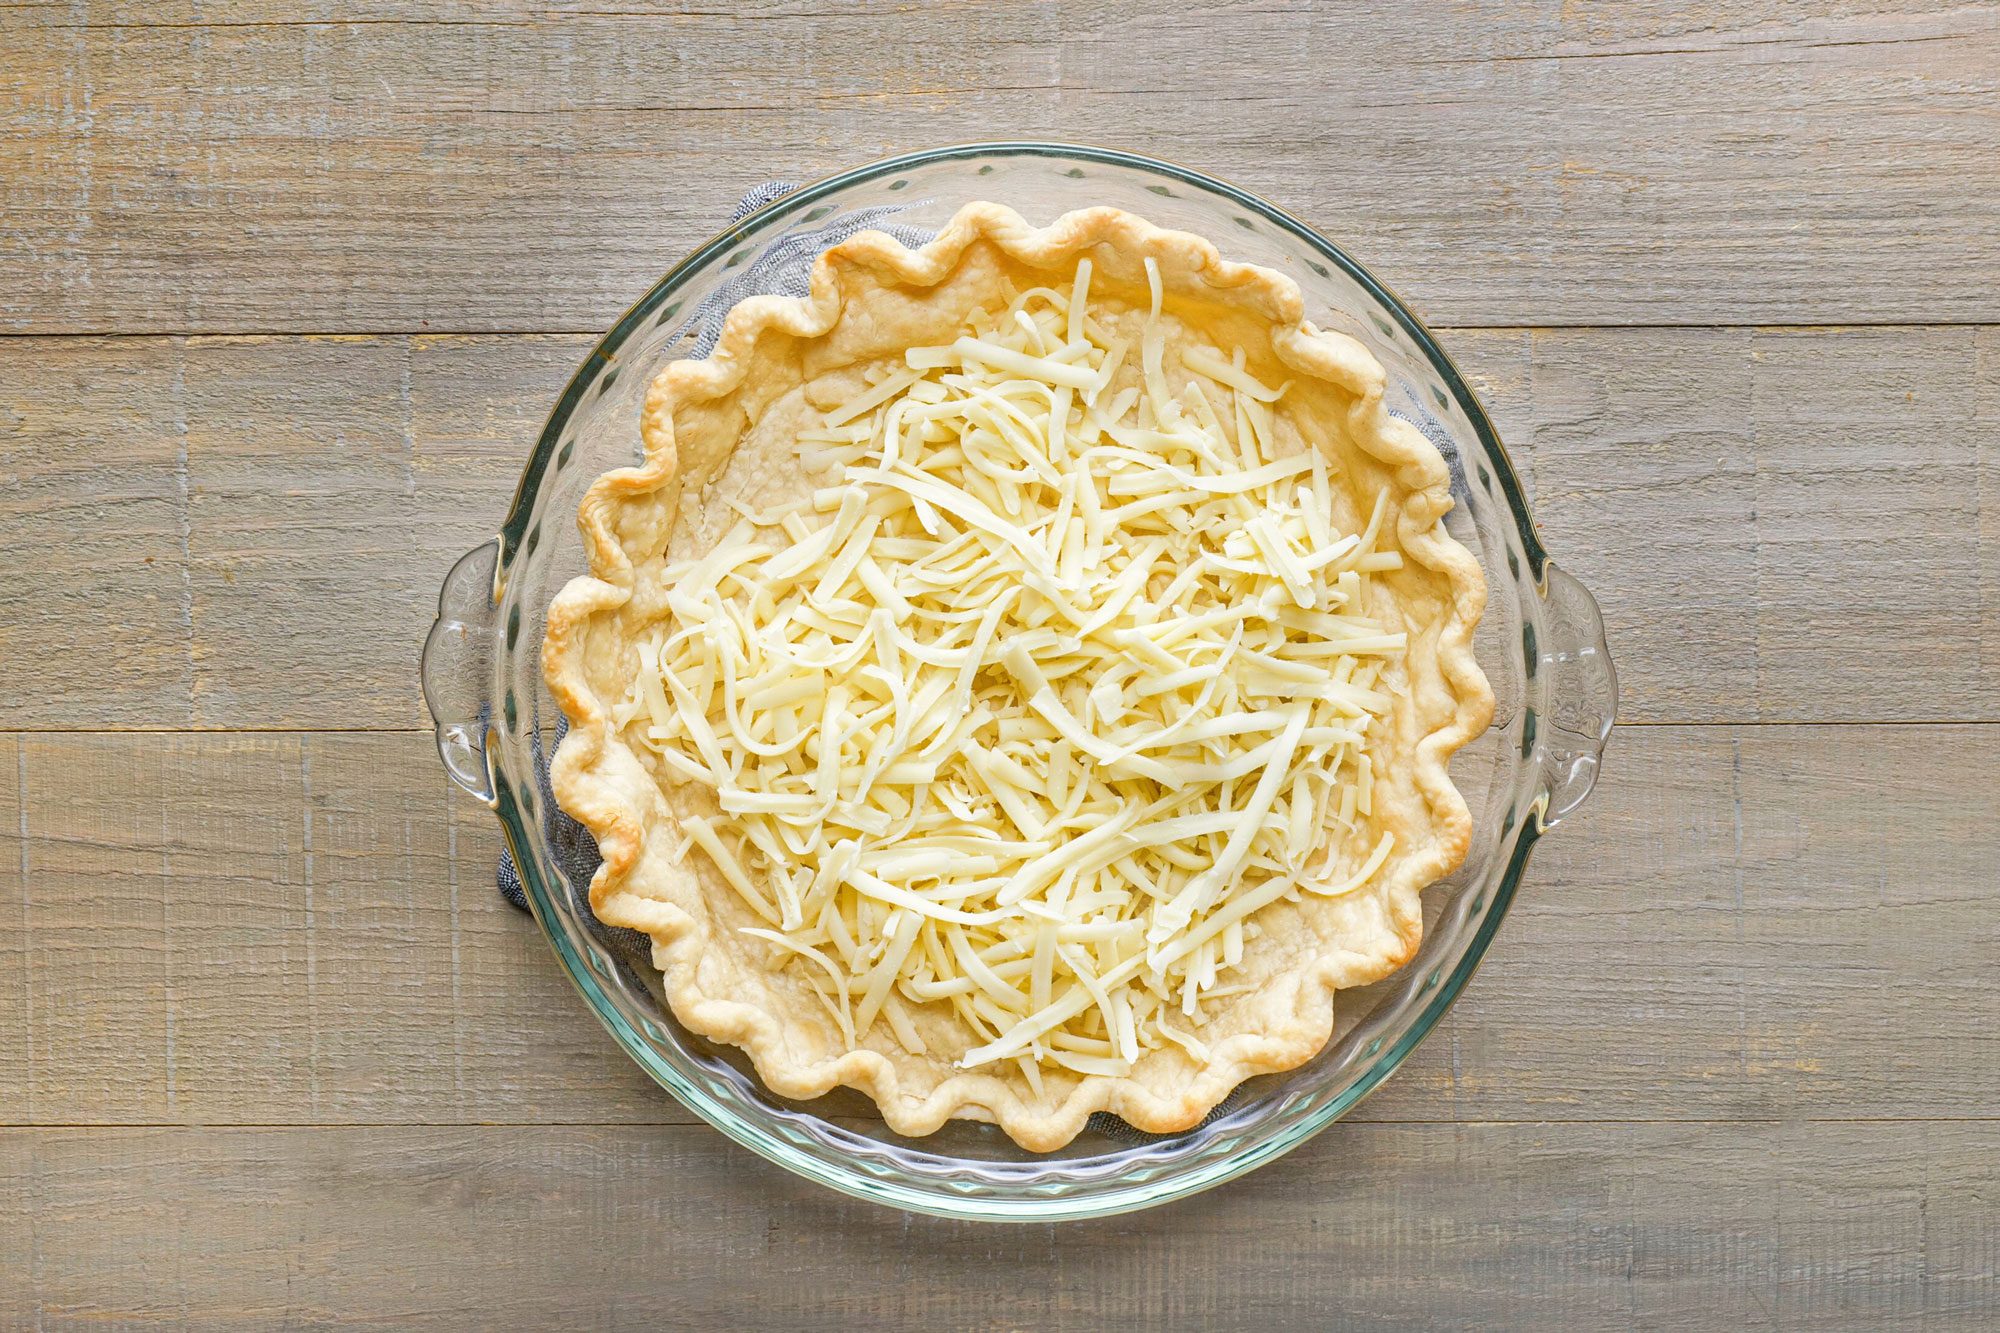 Sprinkle the cheese into the pie crust